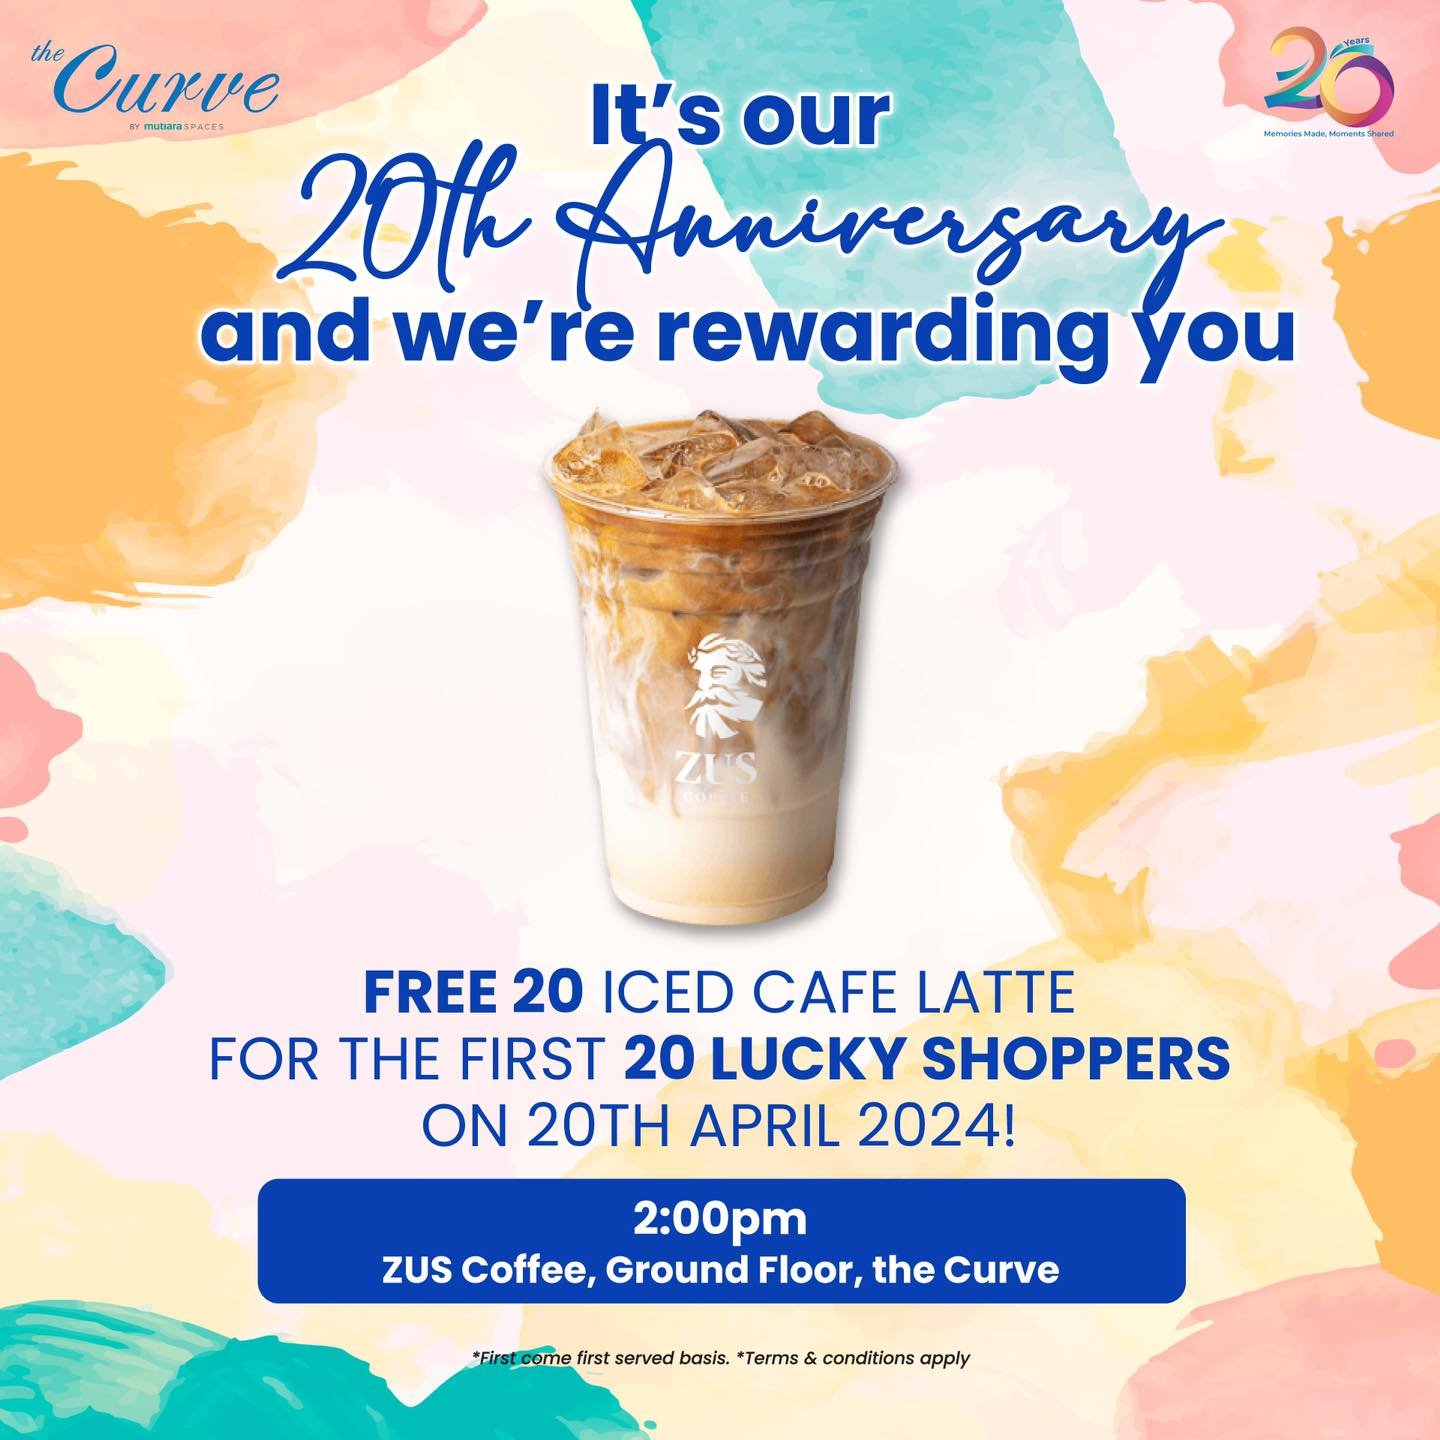 Join us in celebrating the Curve&rsquo;s 20th Anniversary! 

Be one of the first 20 lucky shoppers to enjoy a refreshing Iced Cafe Latte on us. Here are the details:

Date: Saturday, 20th April 2024
Time: 2:00 PM
Venue: ZUS Coffee, the Curve

Don&rsq